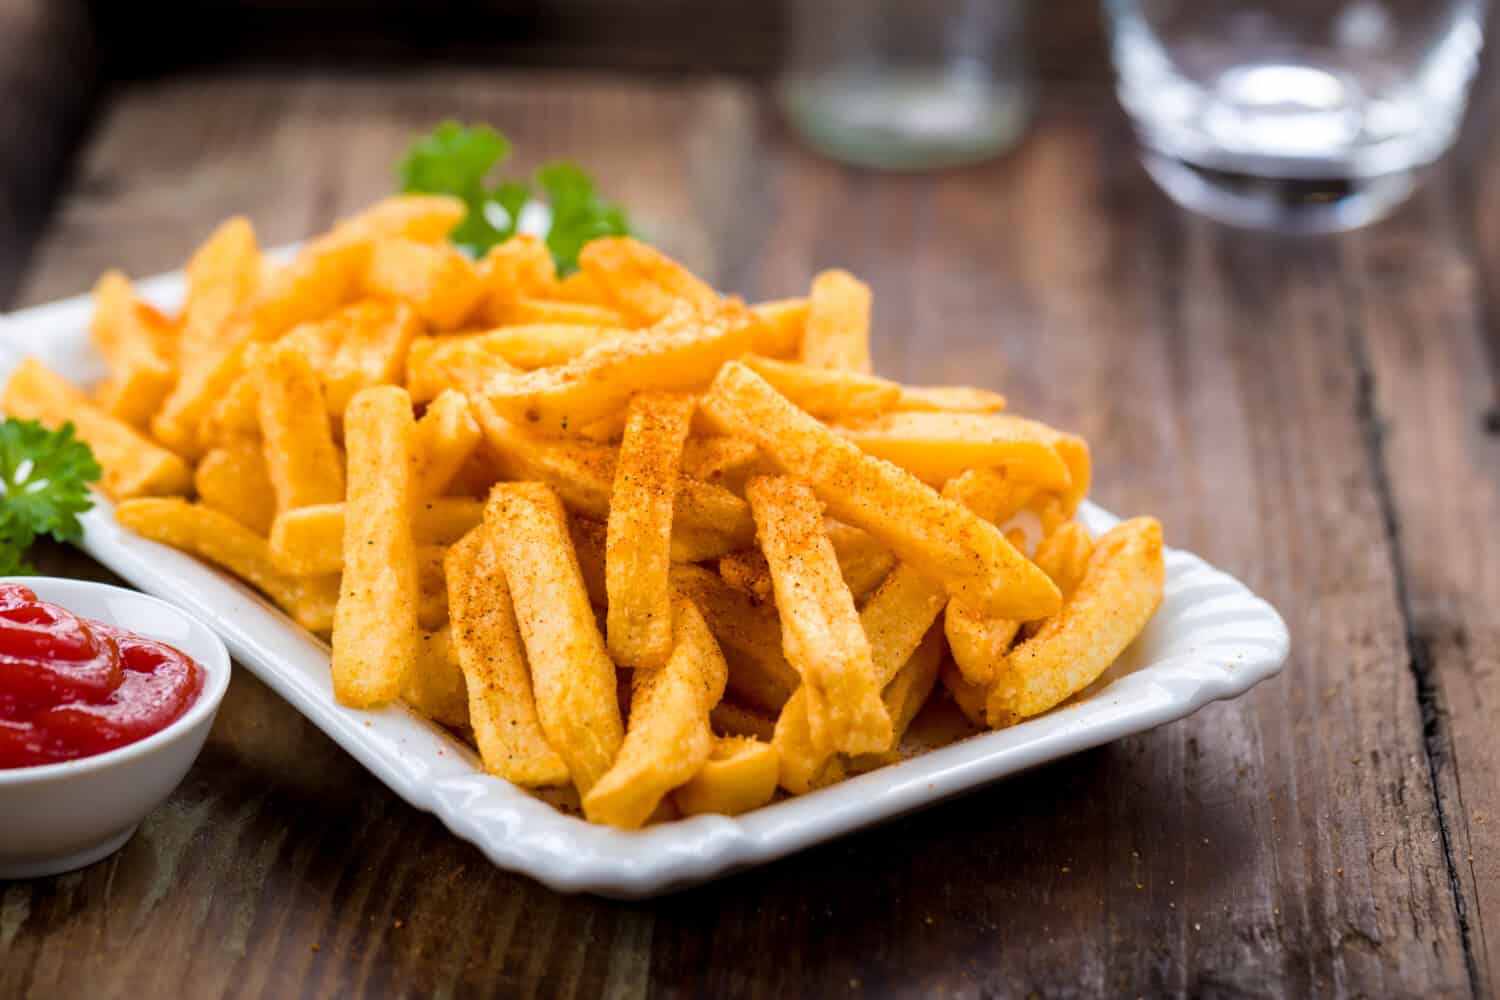 French fries in a bowl on a wooden background